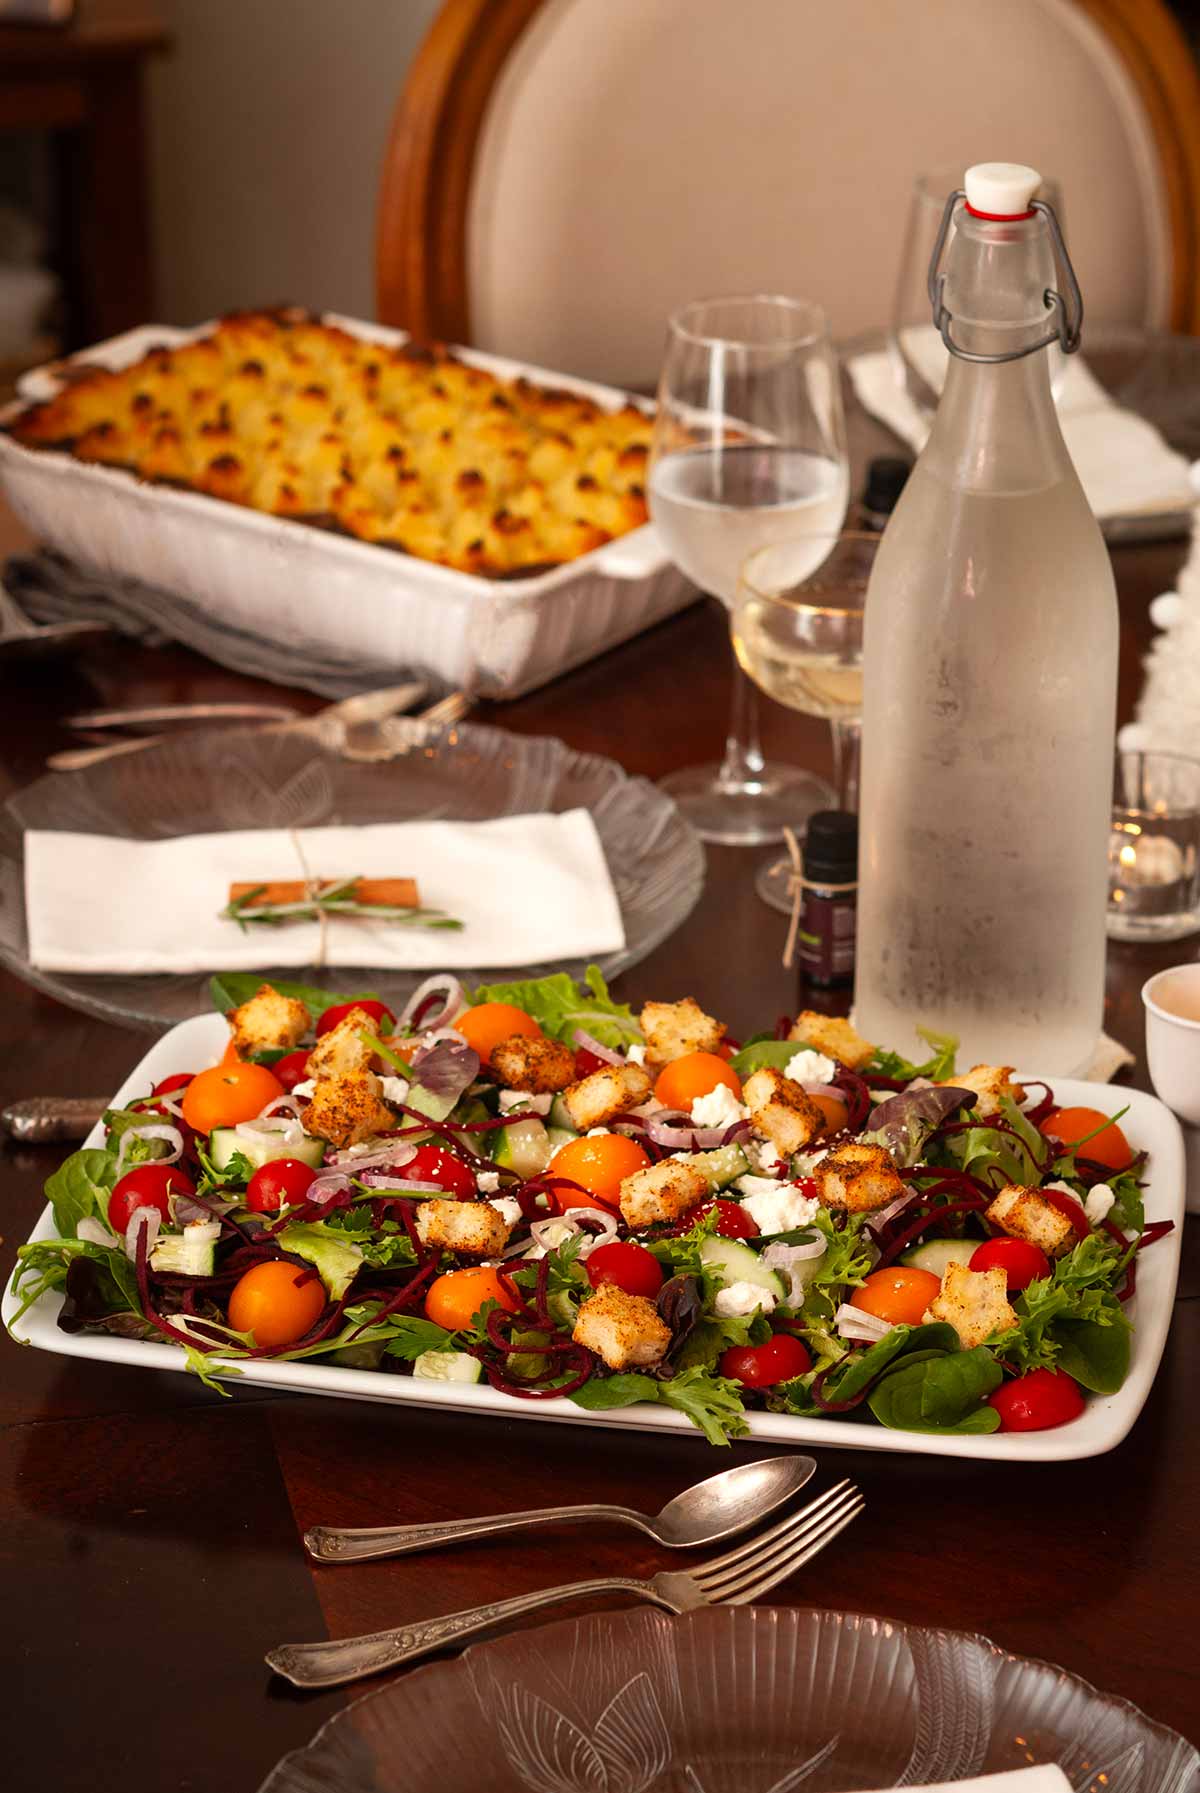 A festive salad with star-shaped croutons on a set dining table with shepherd's pie.